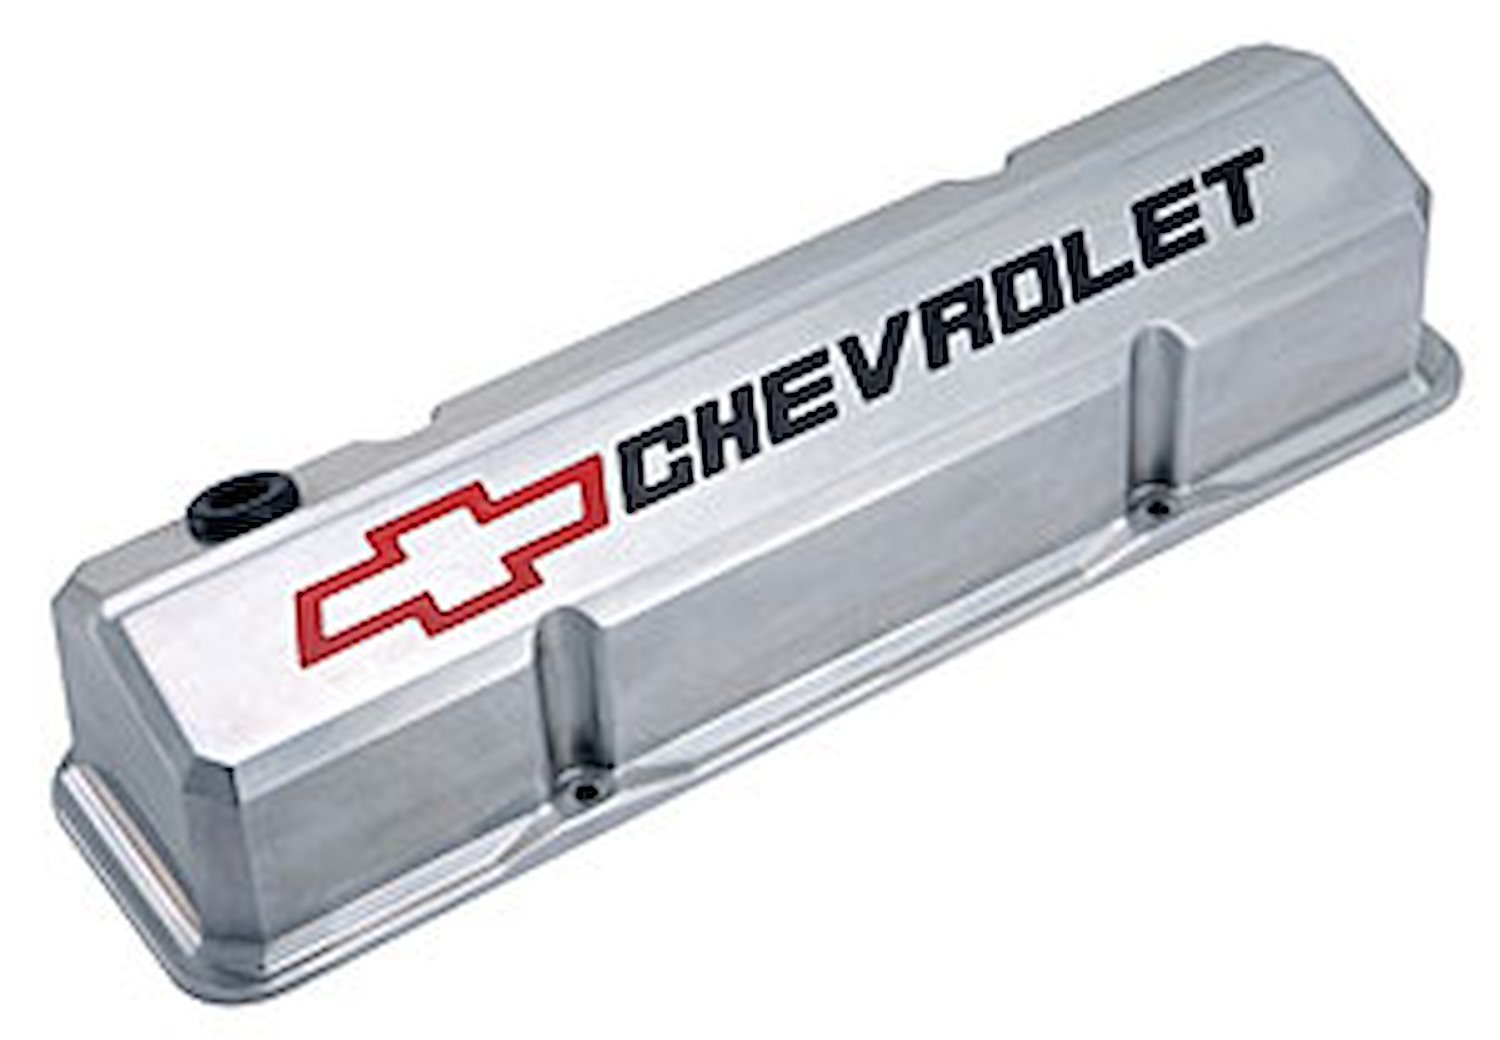 Die-Cast Slant-Edge Valve Covers for 1958-1986 Small Block Chevy Chevrolet/Bowtie Recessed Red/Black Emblem in Polished Finish